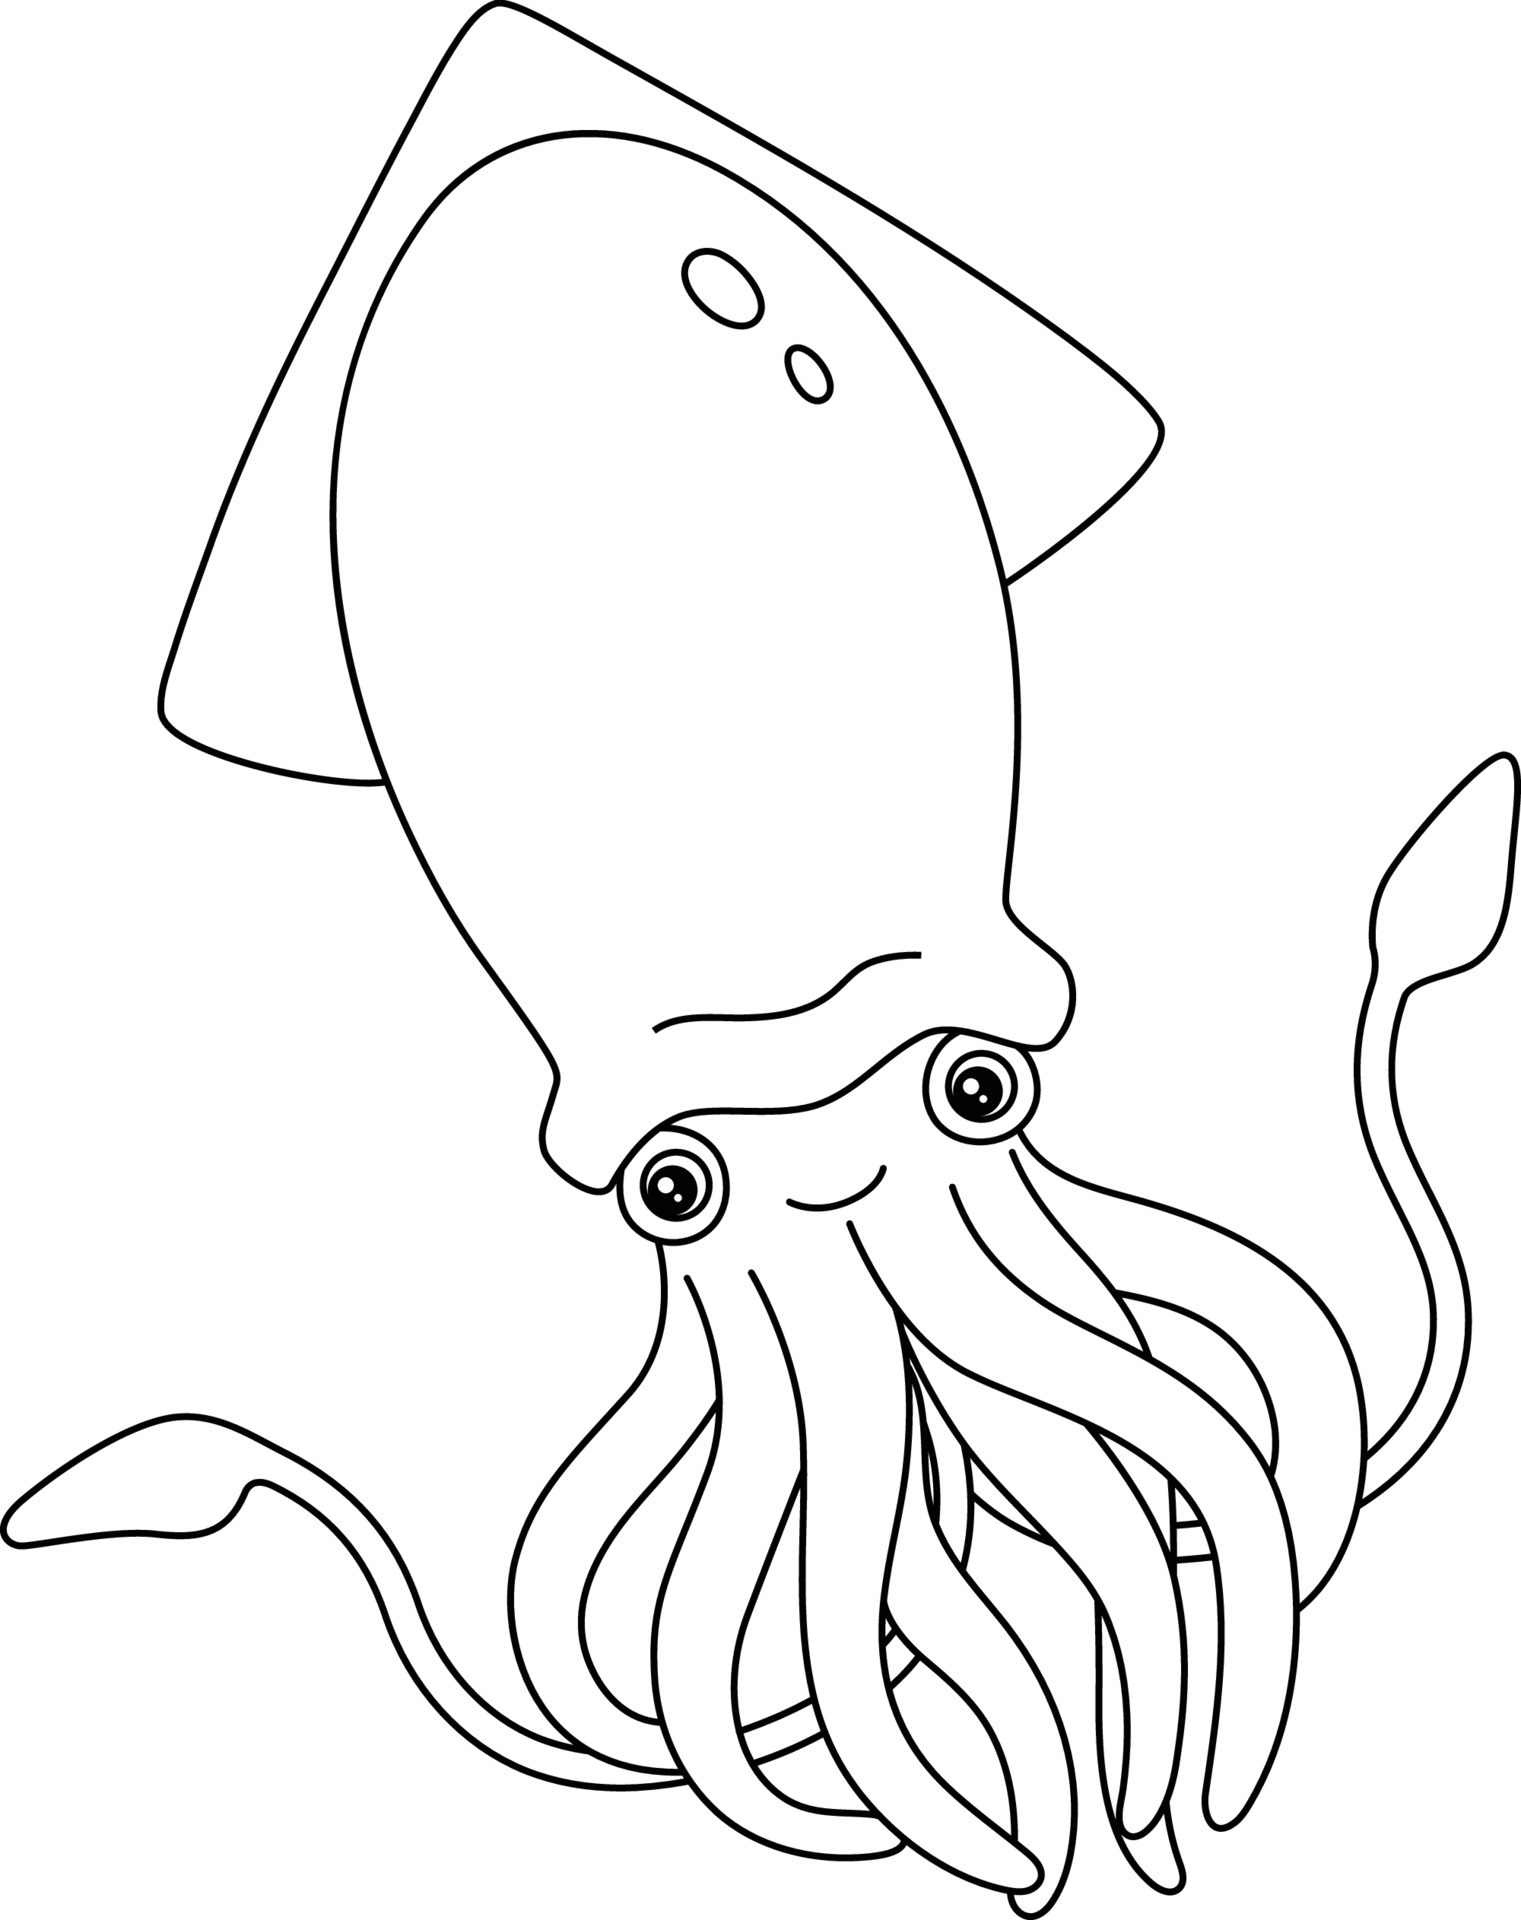 Giant squid coloring page